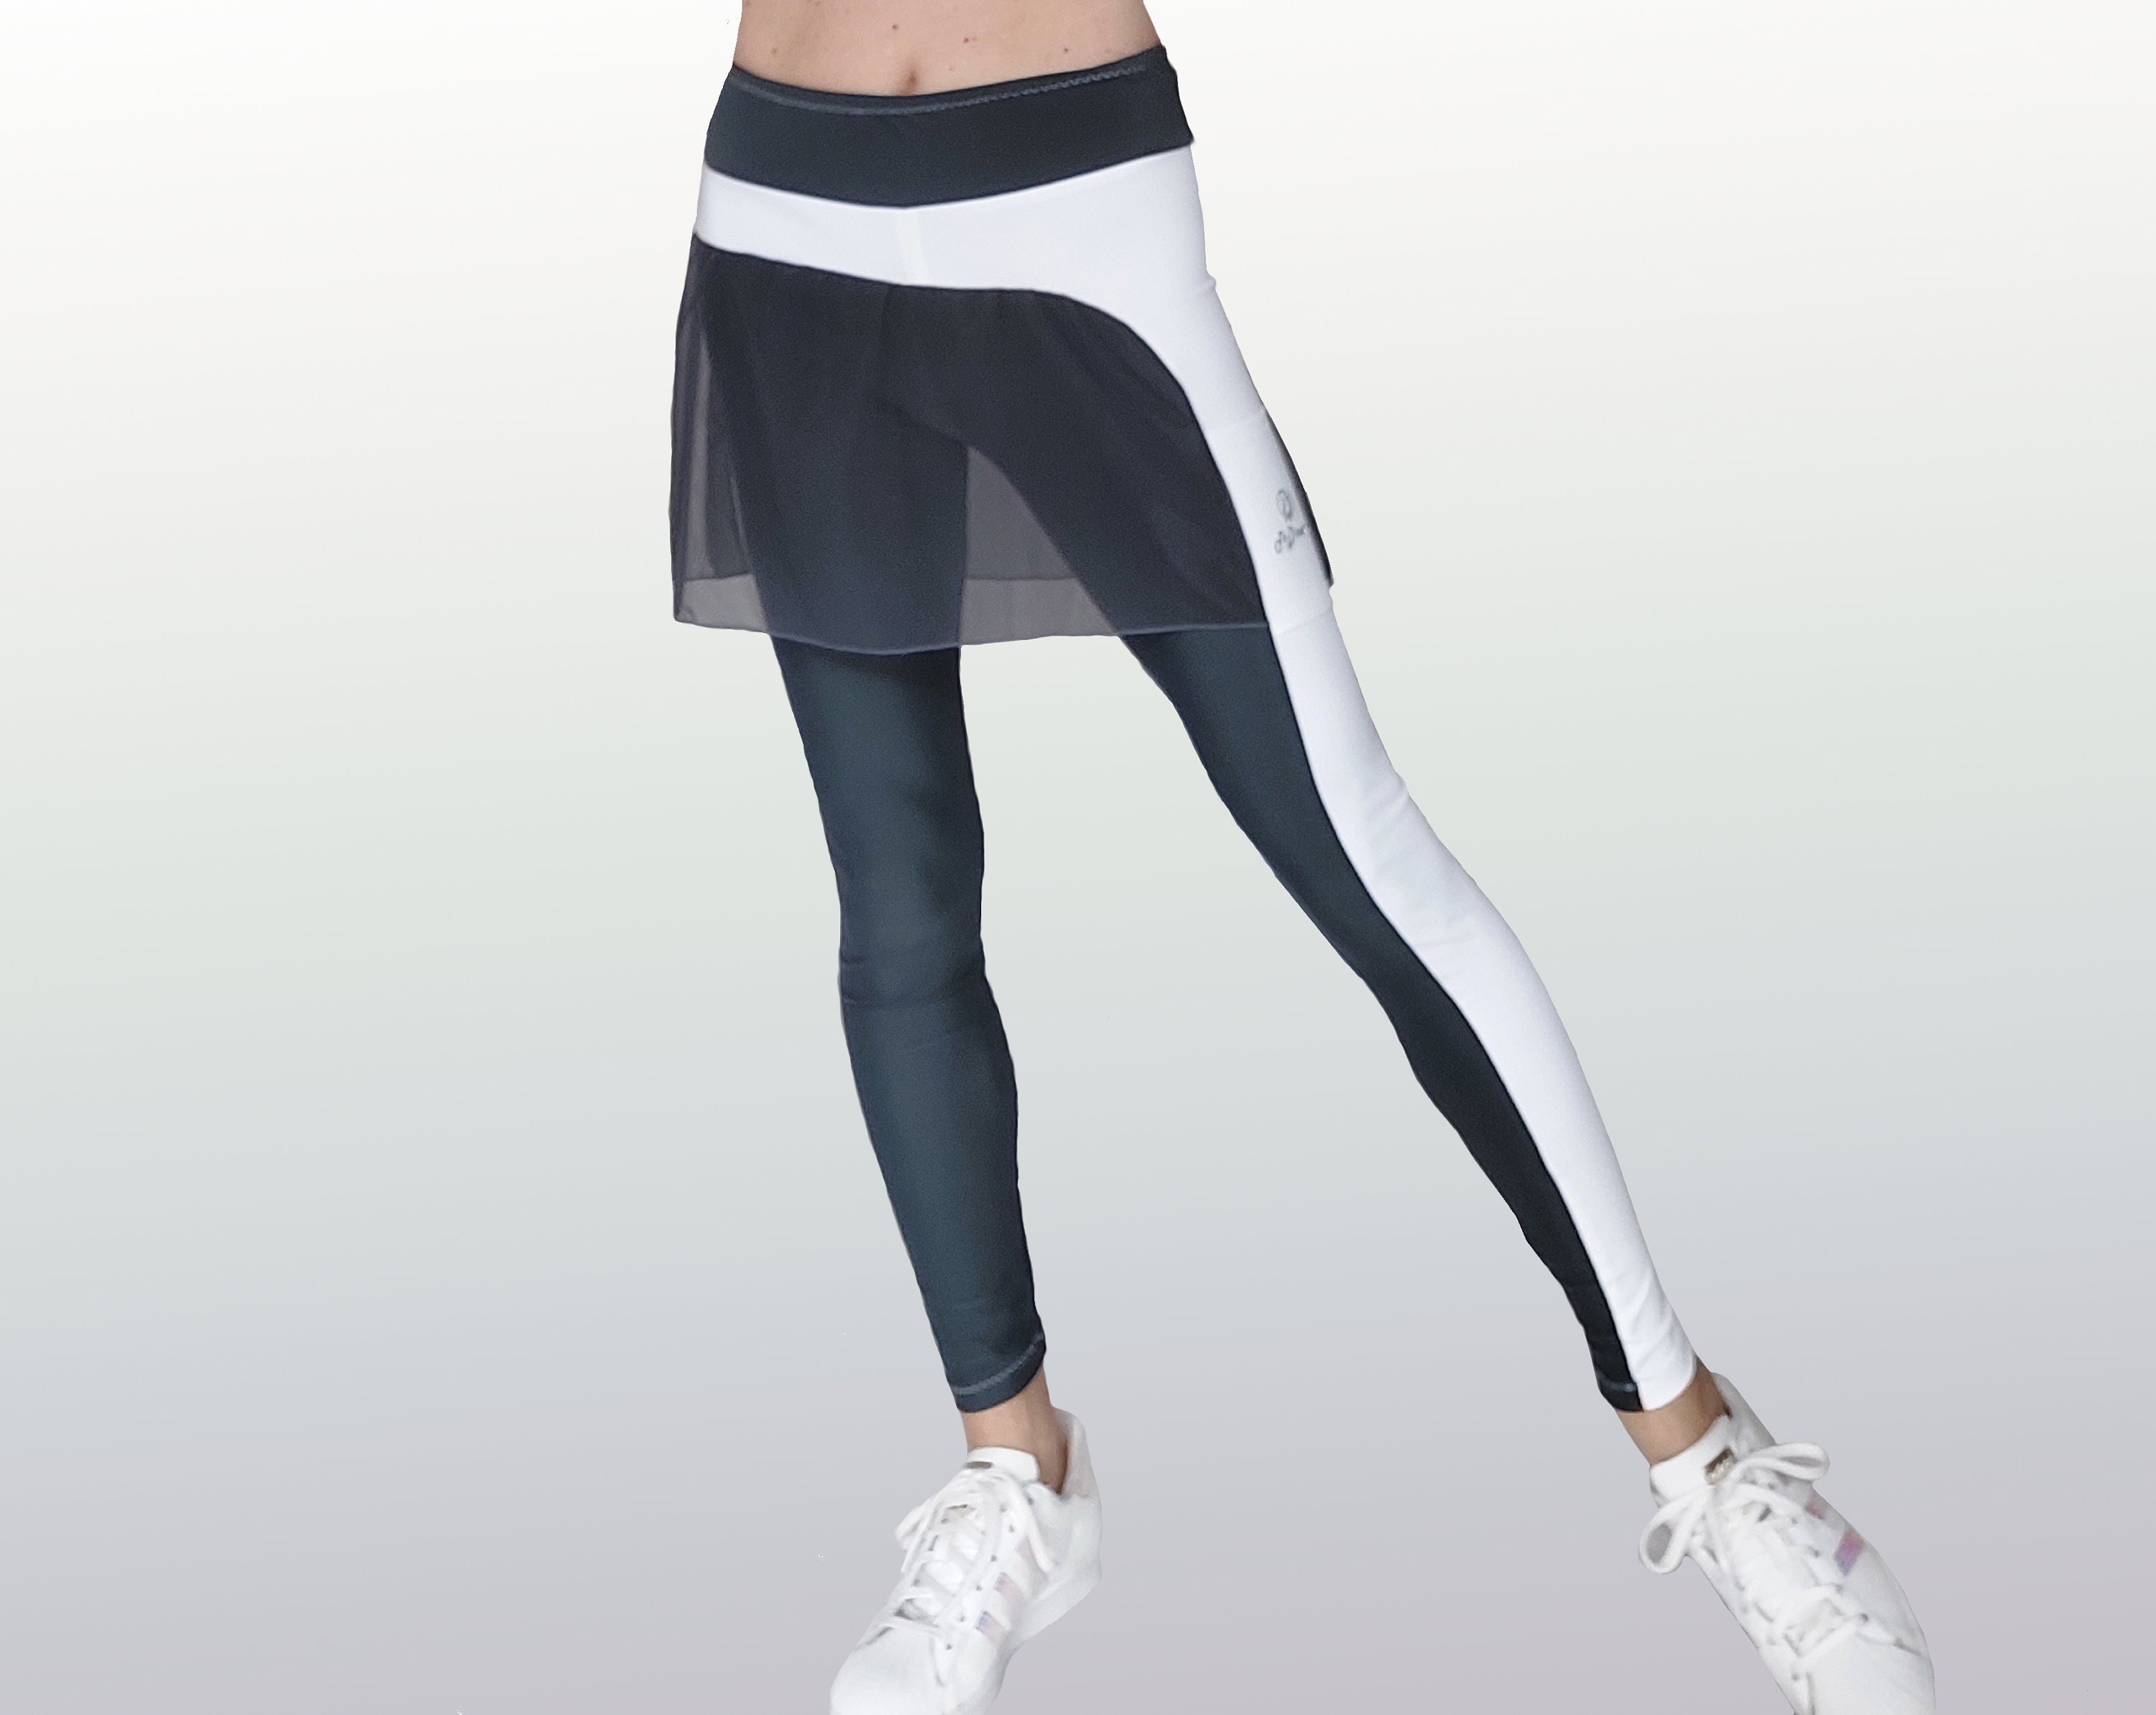 Skeggings: Leggings With Integrated Slit Skirt and Elastic Tulle Flounce,  for Tennis, Paddle, With Ball Pocket. 